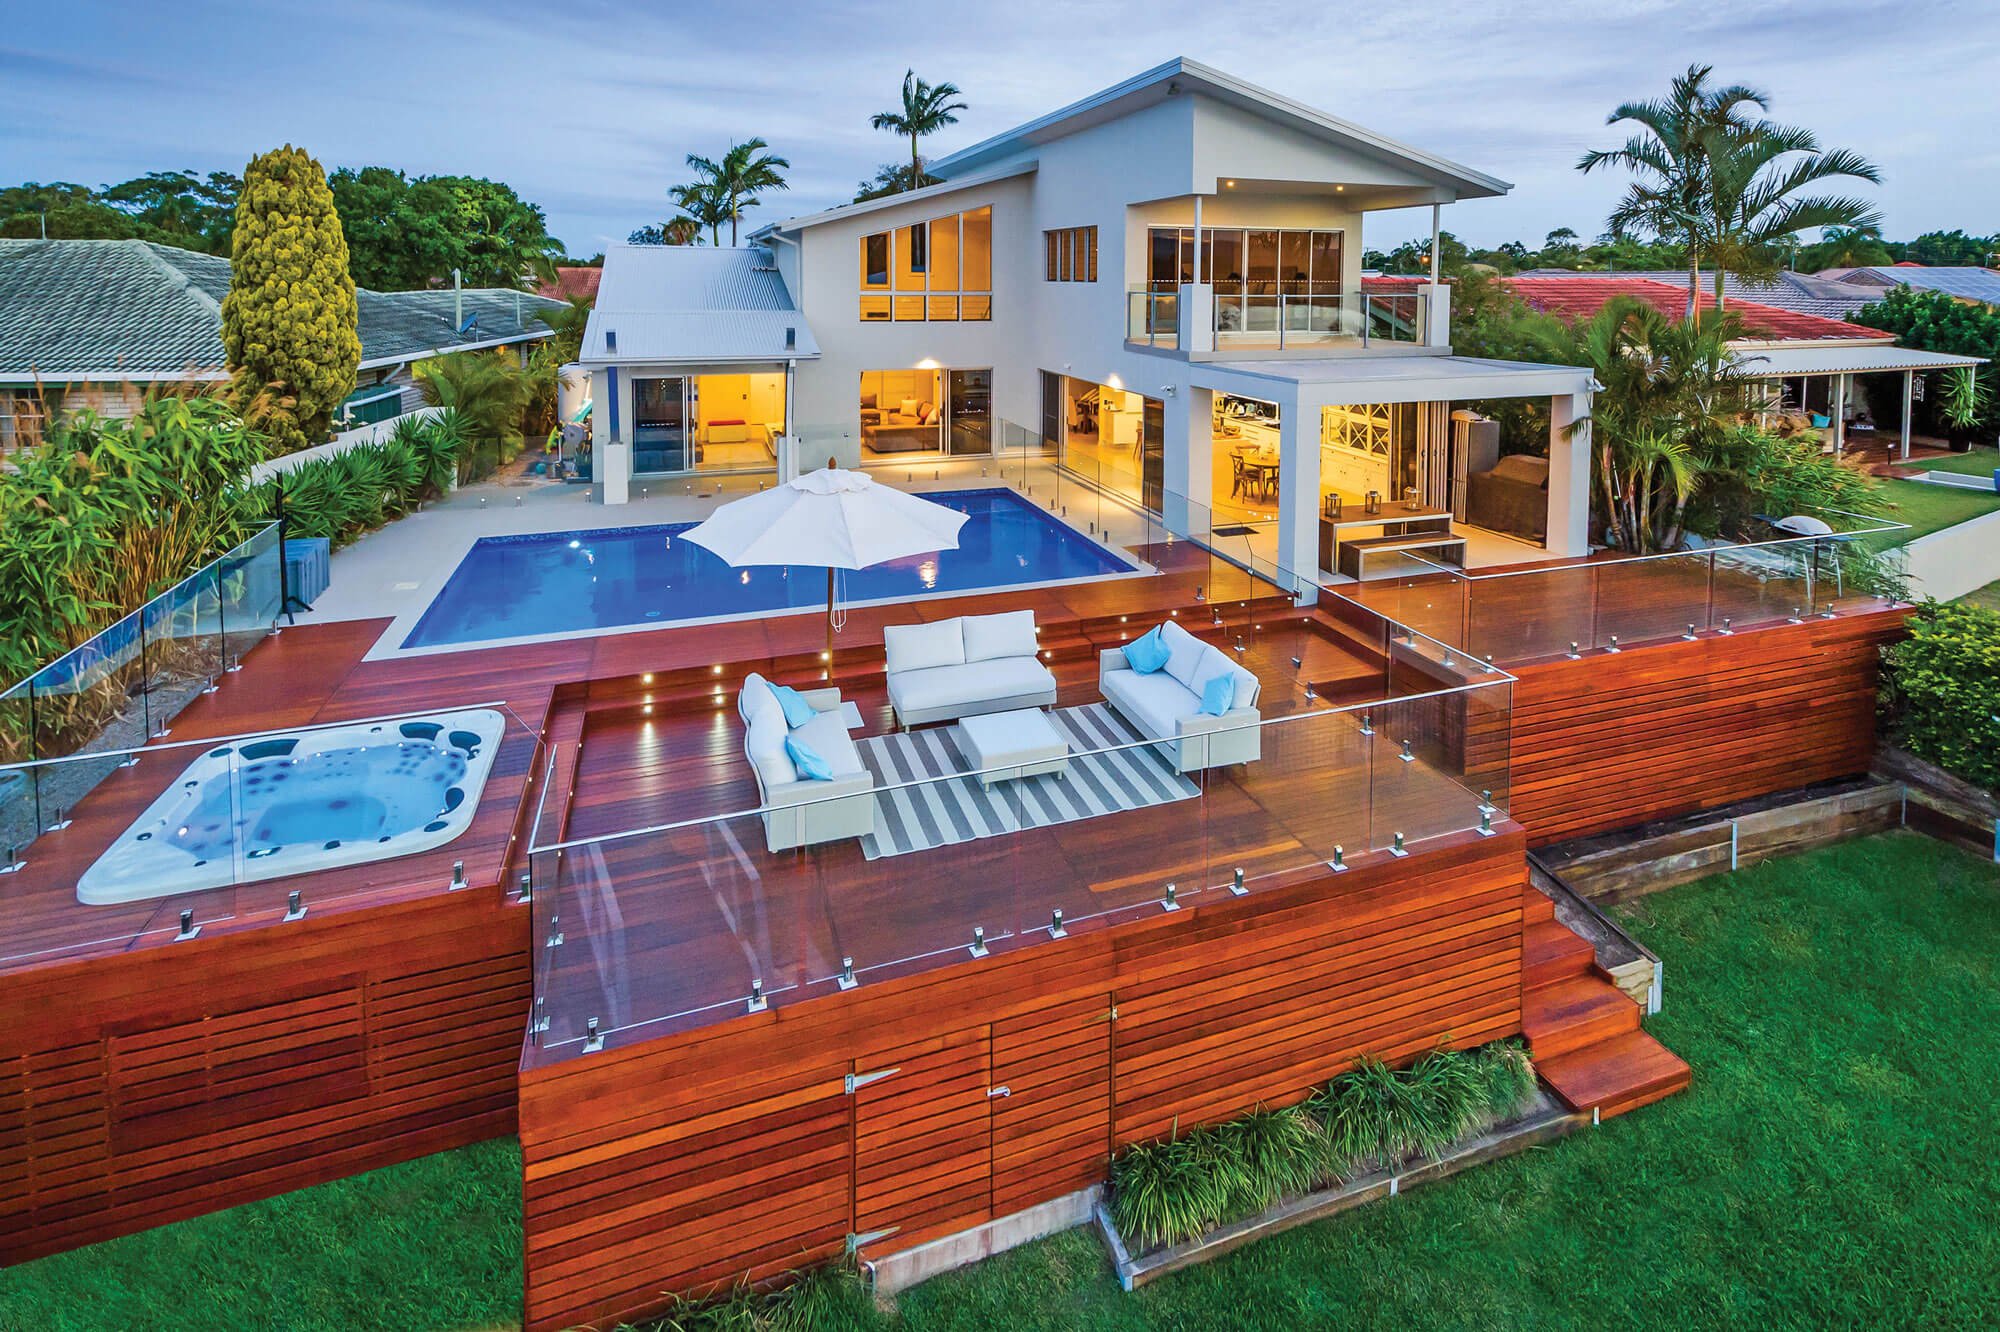 A modern home with a pool and deck.